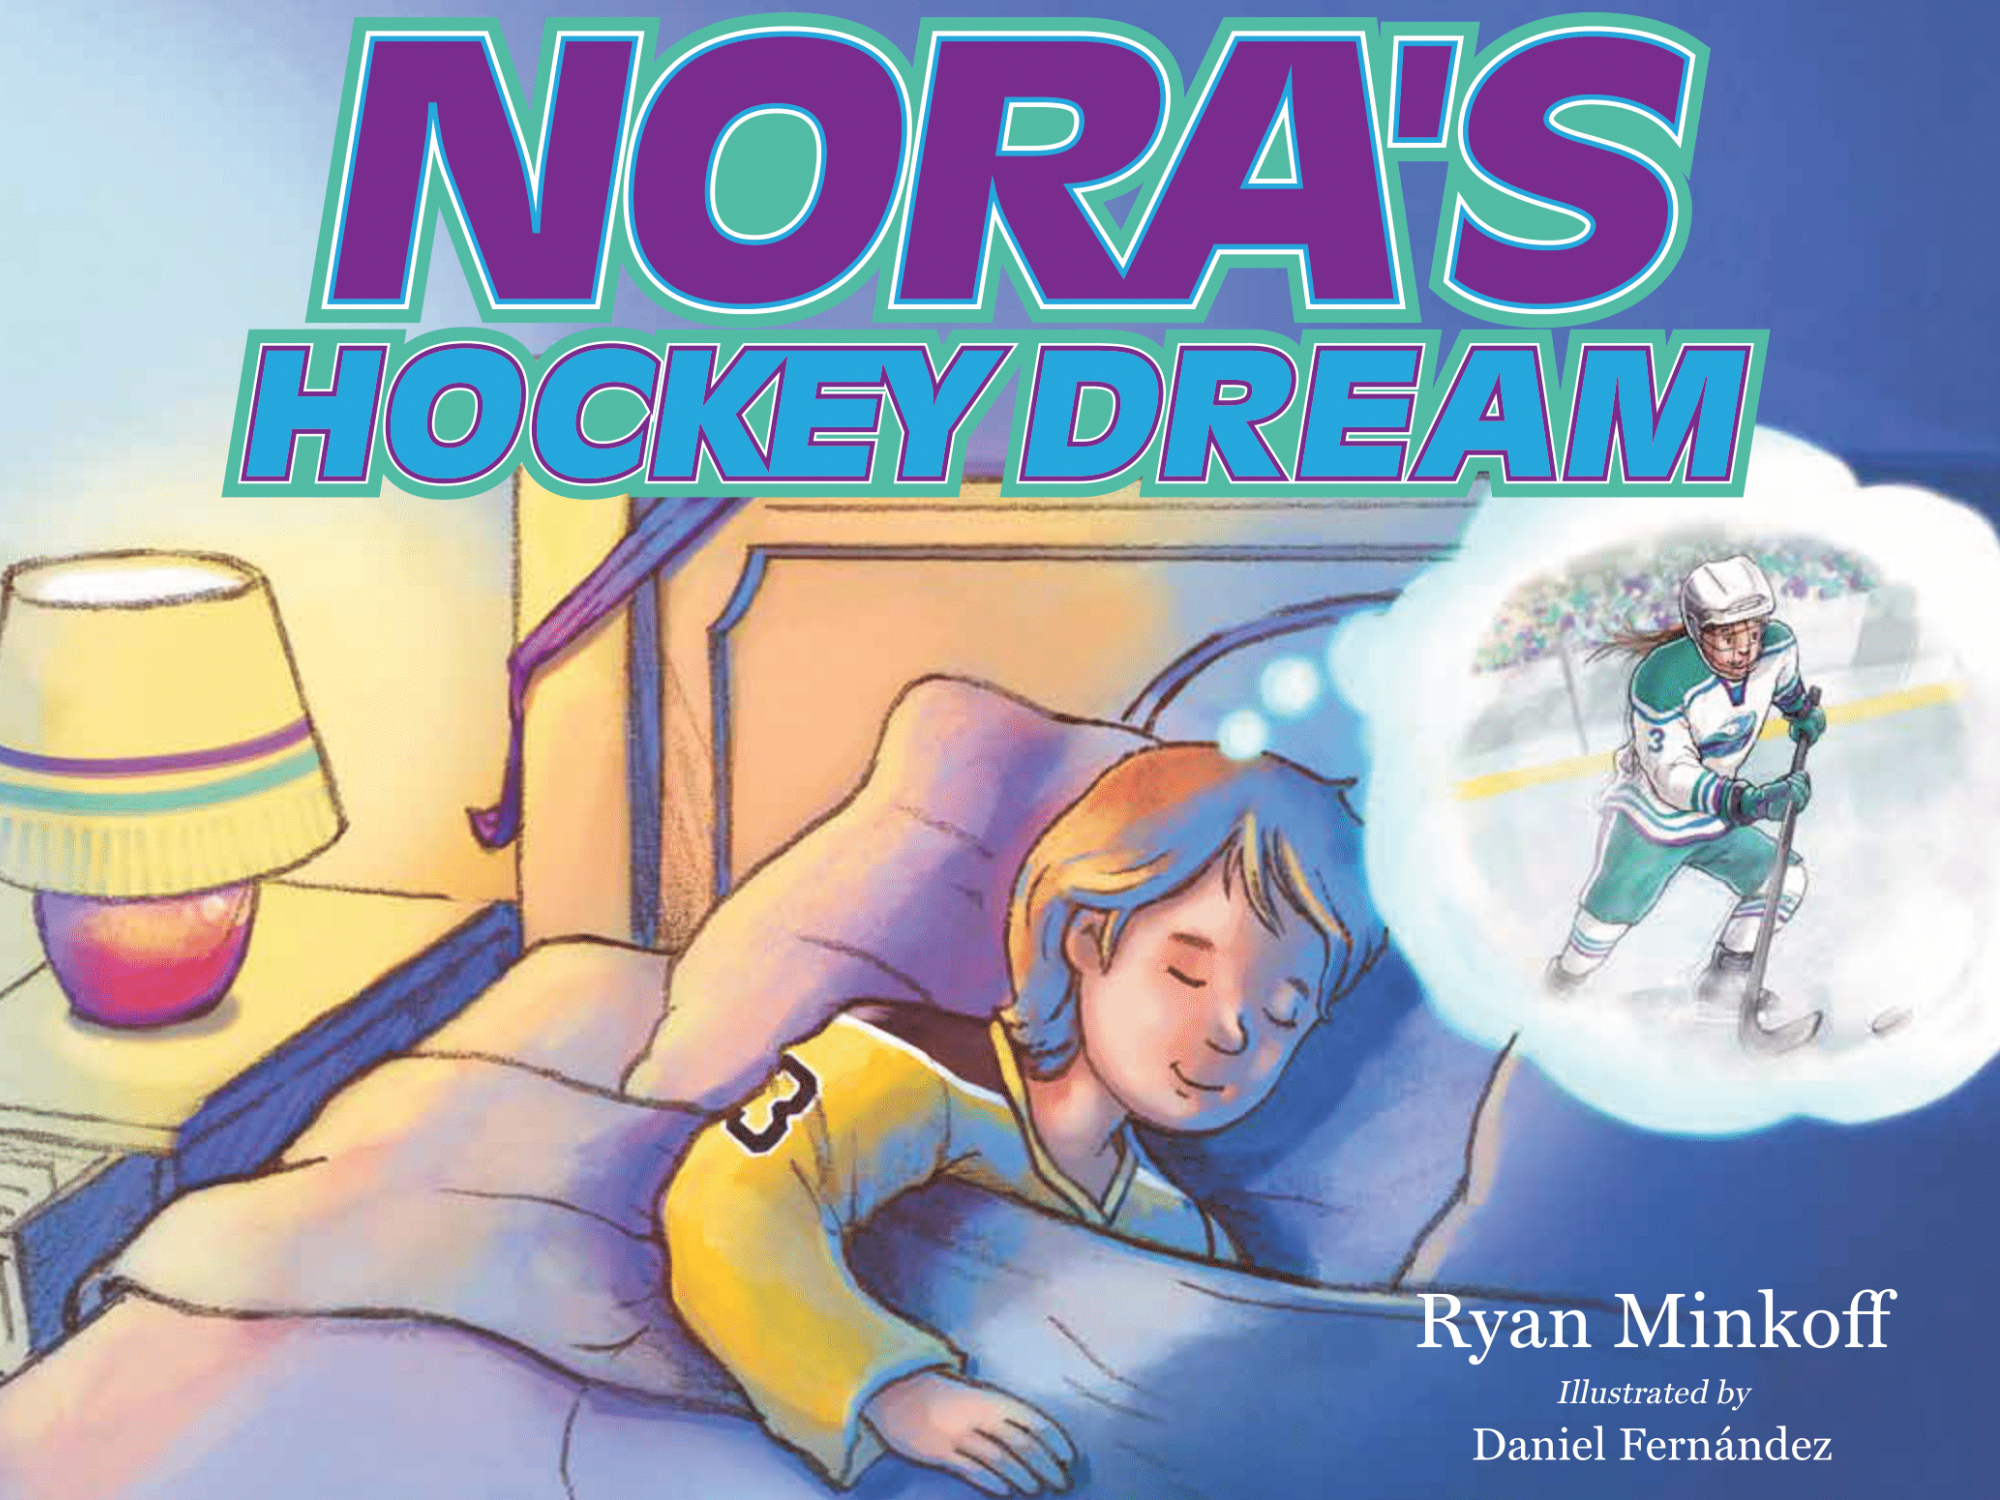 The book cover for "Nora's Hockey Dream" shows a child in bed dreaming about playing hockey.